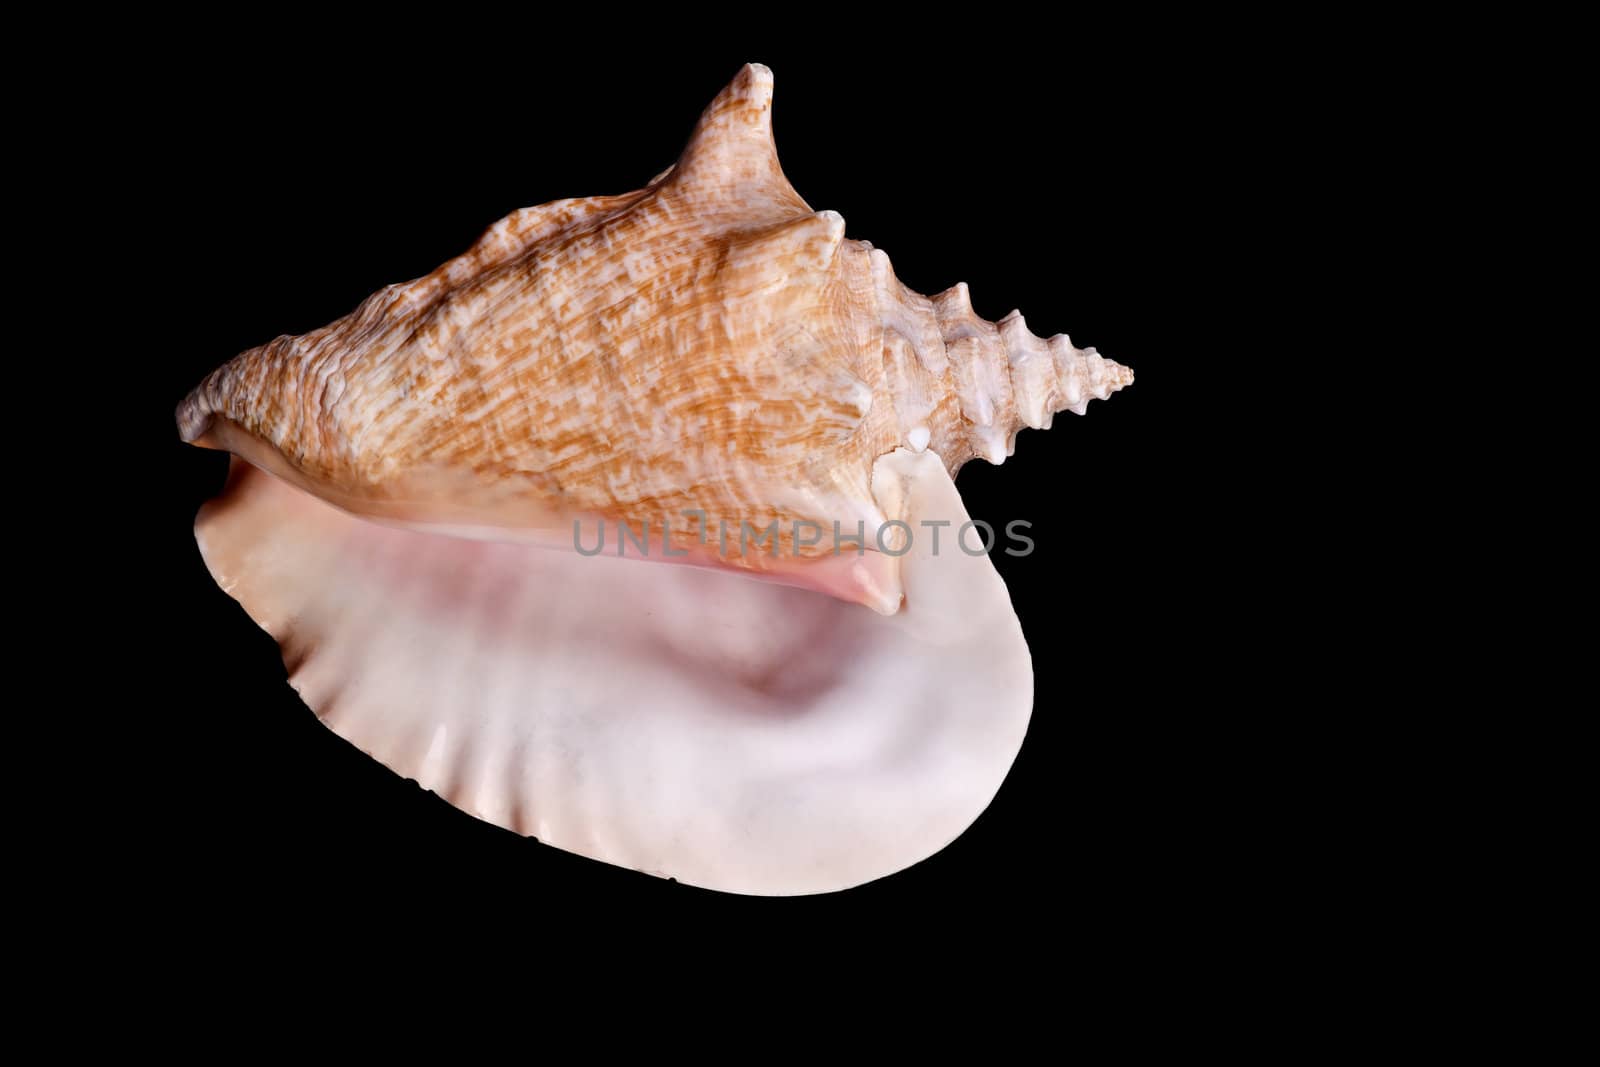 Carabean Shell,  the image on black background